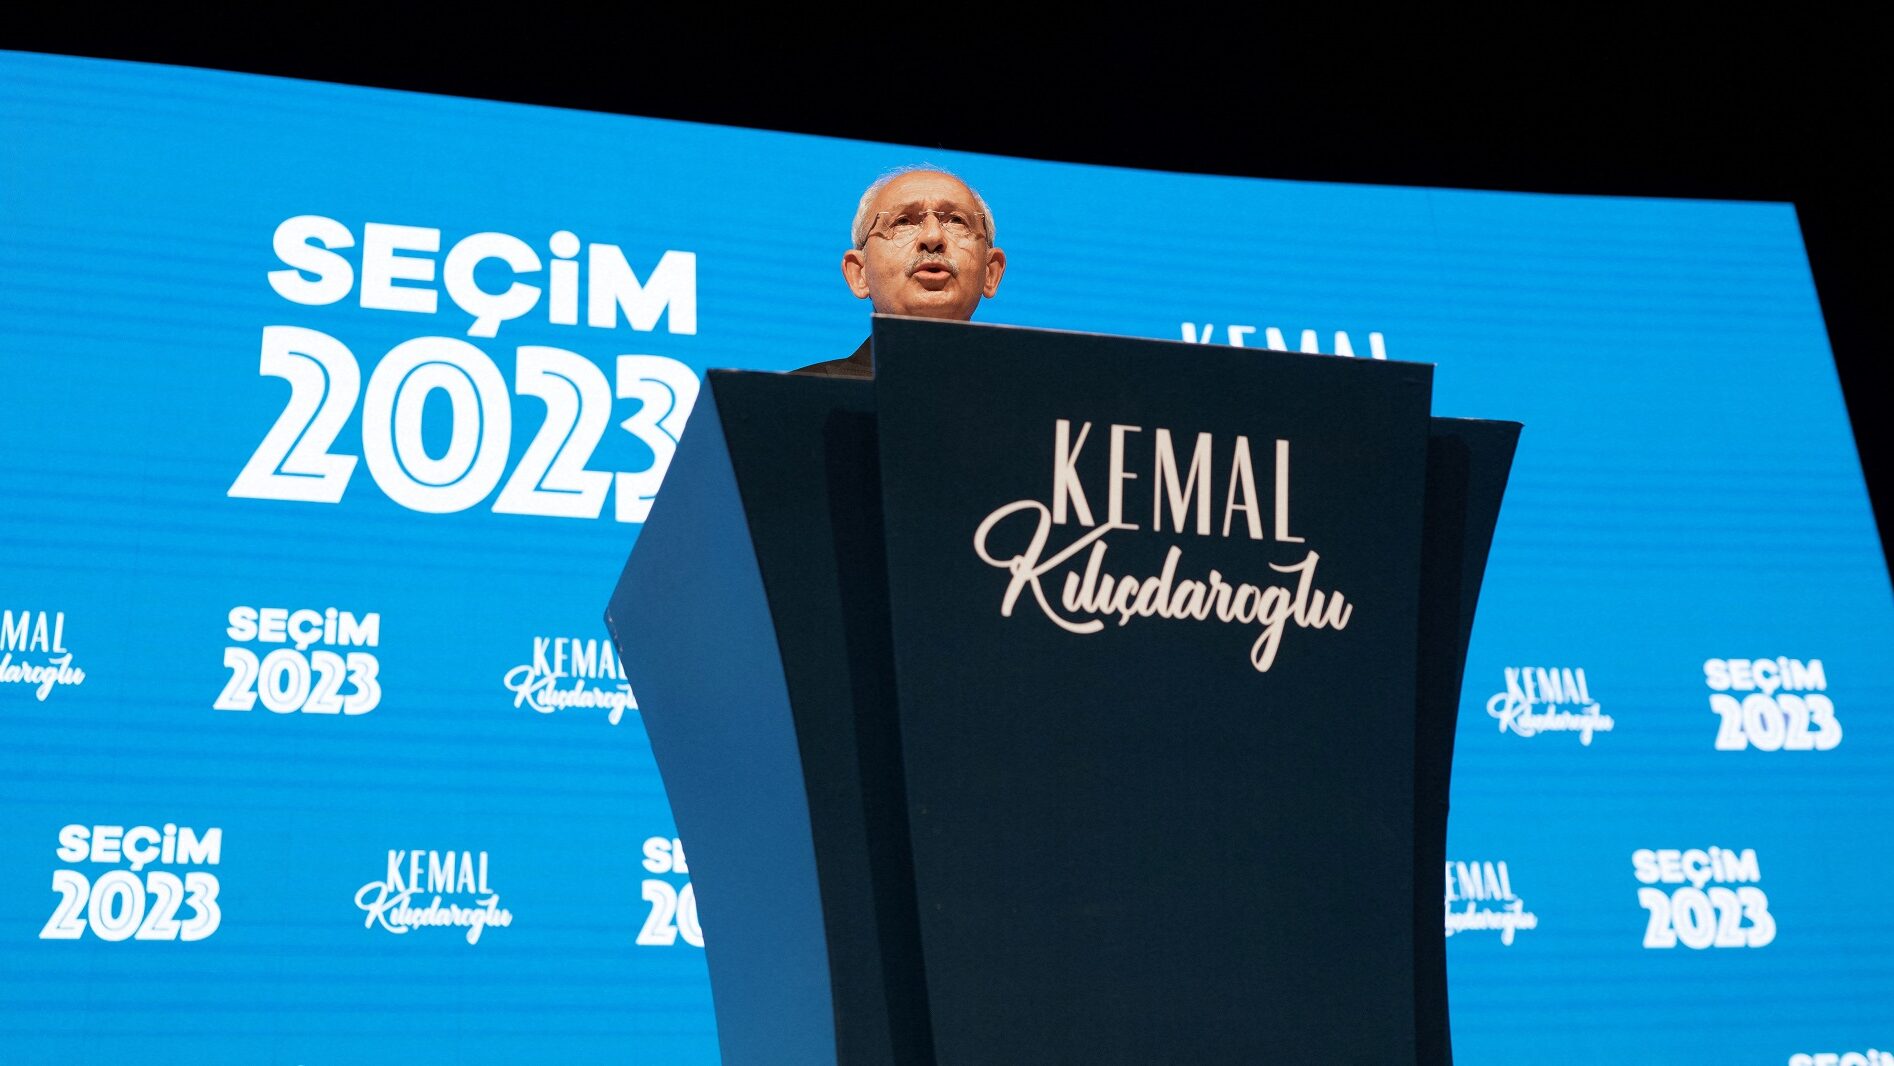 Turkish Opposition Plays Up Nationalist Sentiment Ahead of 2nd Round